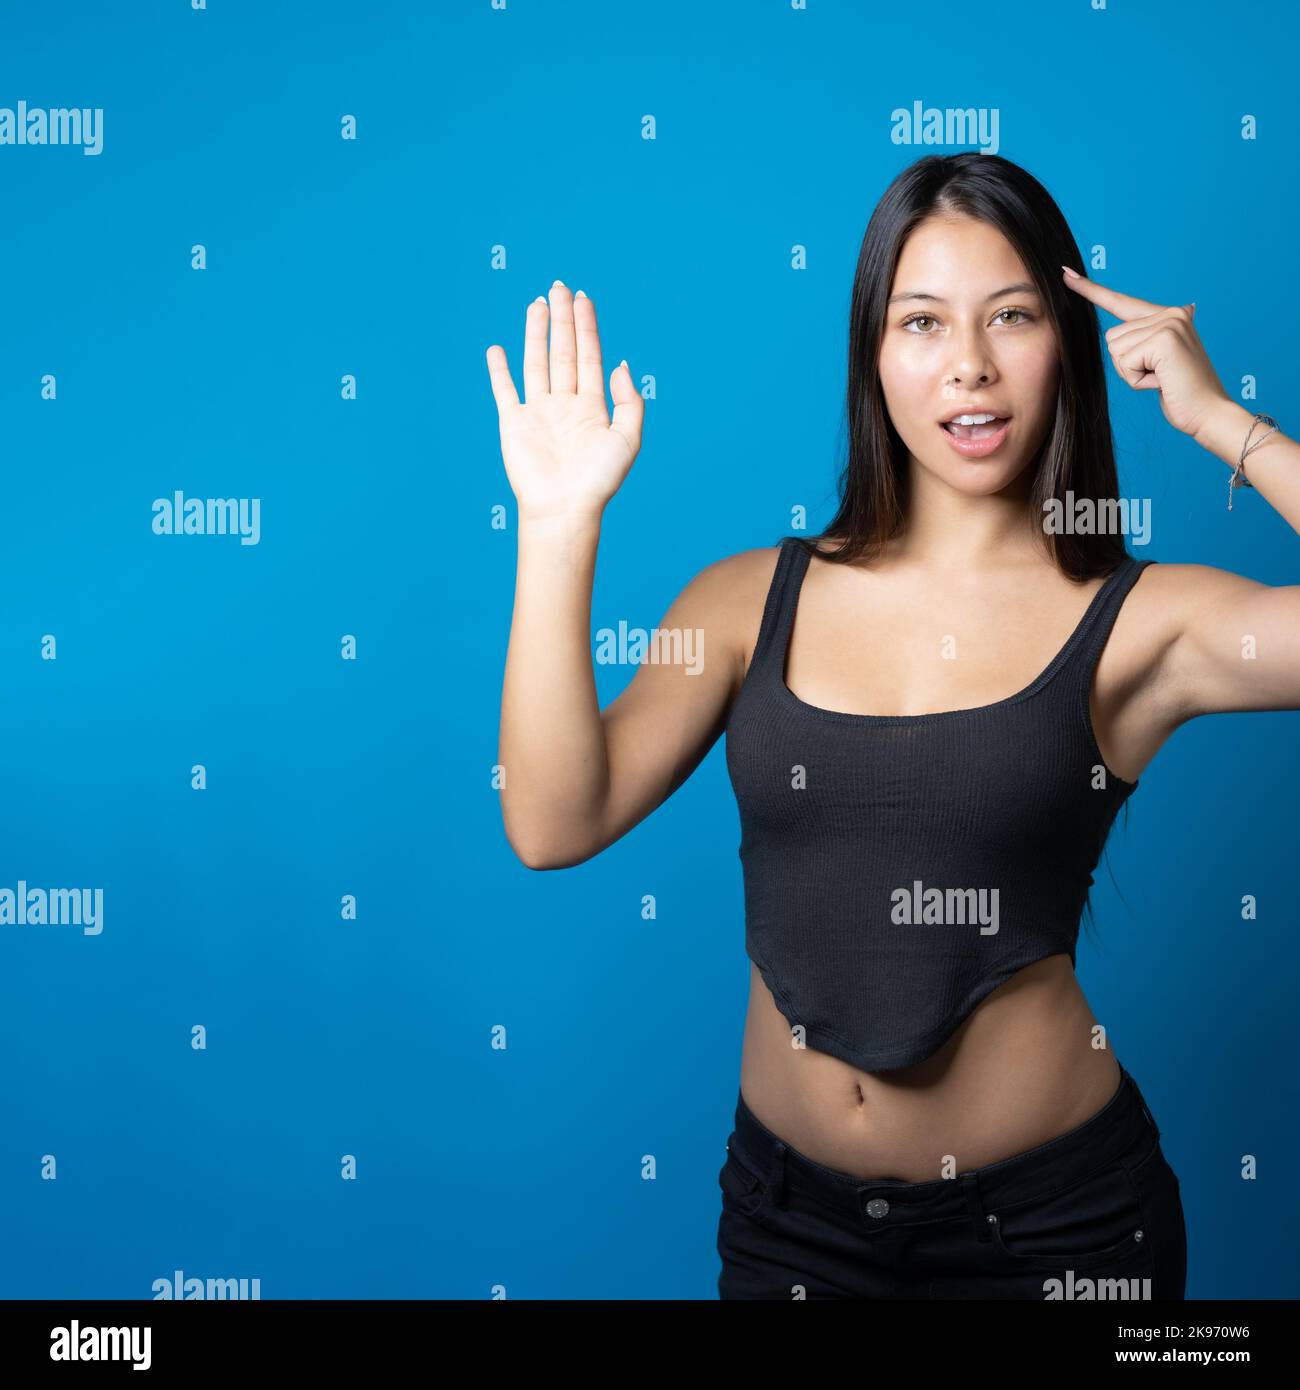 Young multiracial trendy woman with big smile holding and presenting copy space on the side of her palm isolated on blue background Stock Photo